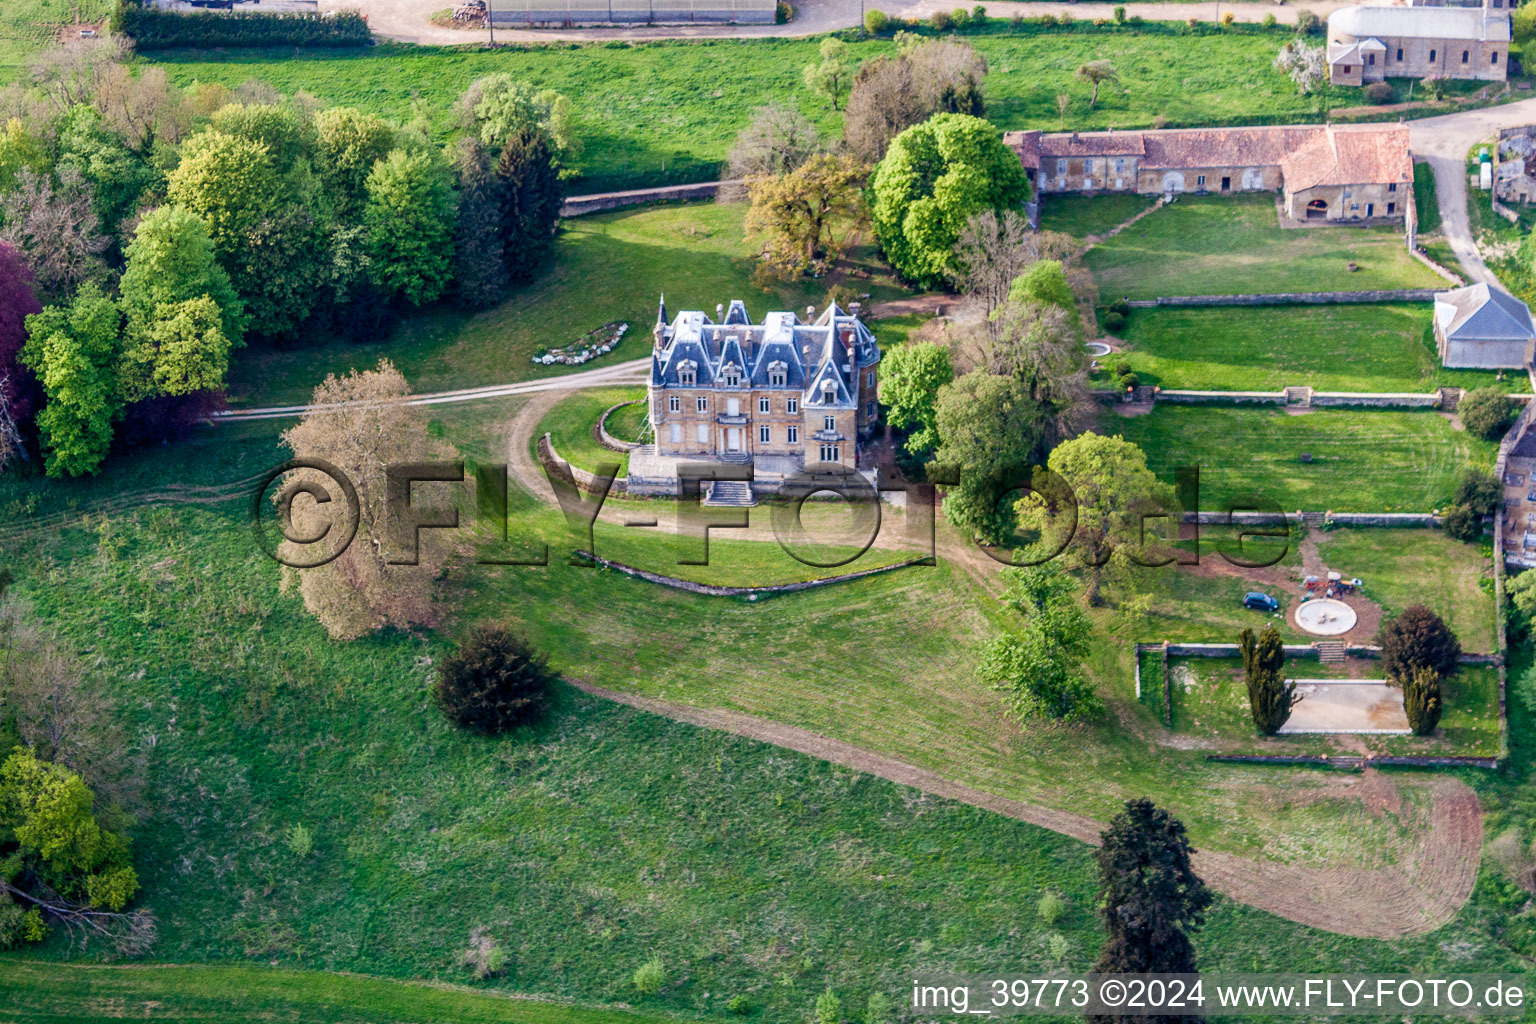 Buildings and parks at the mansion of the farmhouse in Montmedy in Grand Est, France